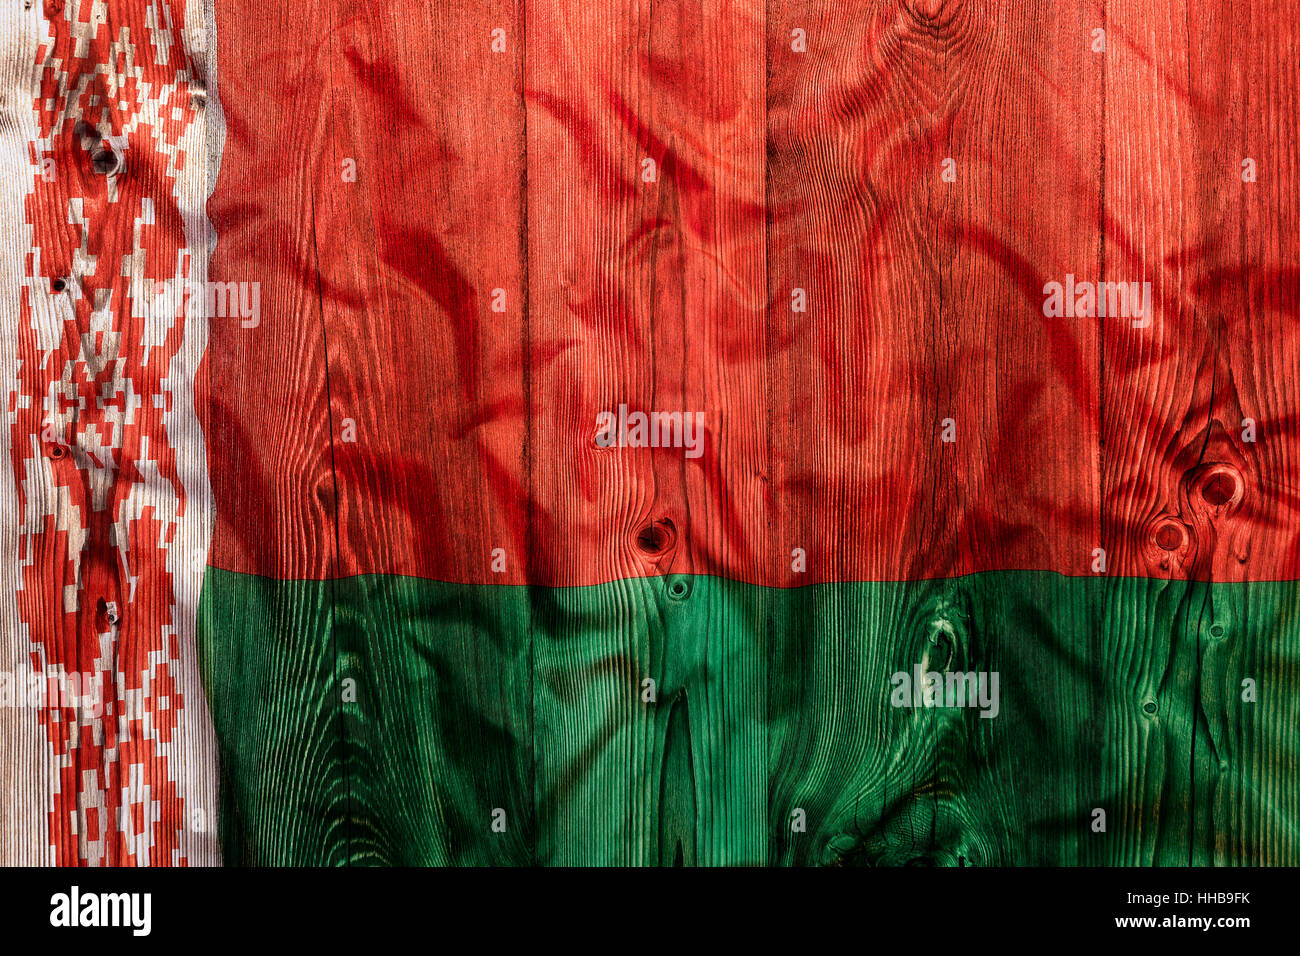 National flag of Belarus on wooden background Stock Photo